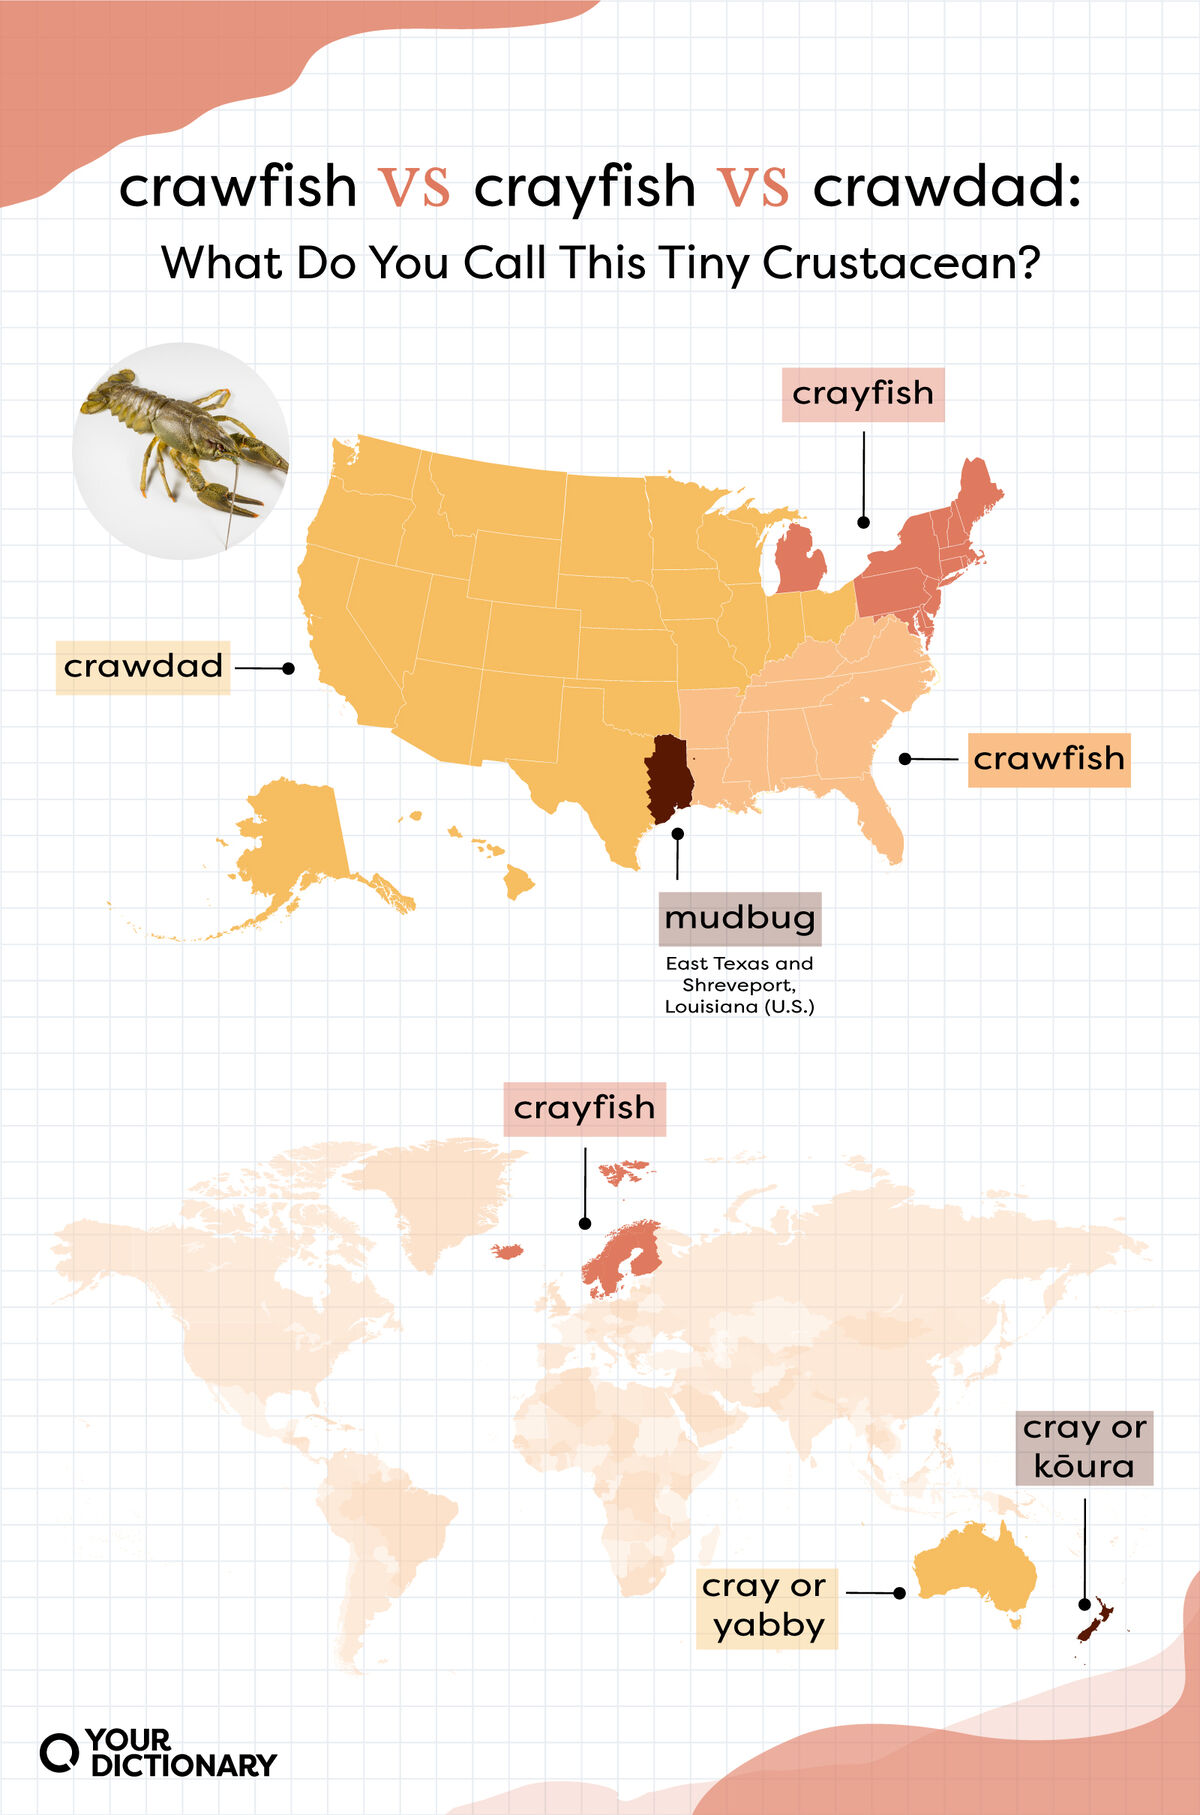 Map of the U.S. and the world that show regions that use each term: "crawfish," "crawdad," or "crayfish."